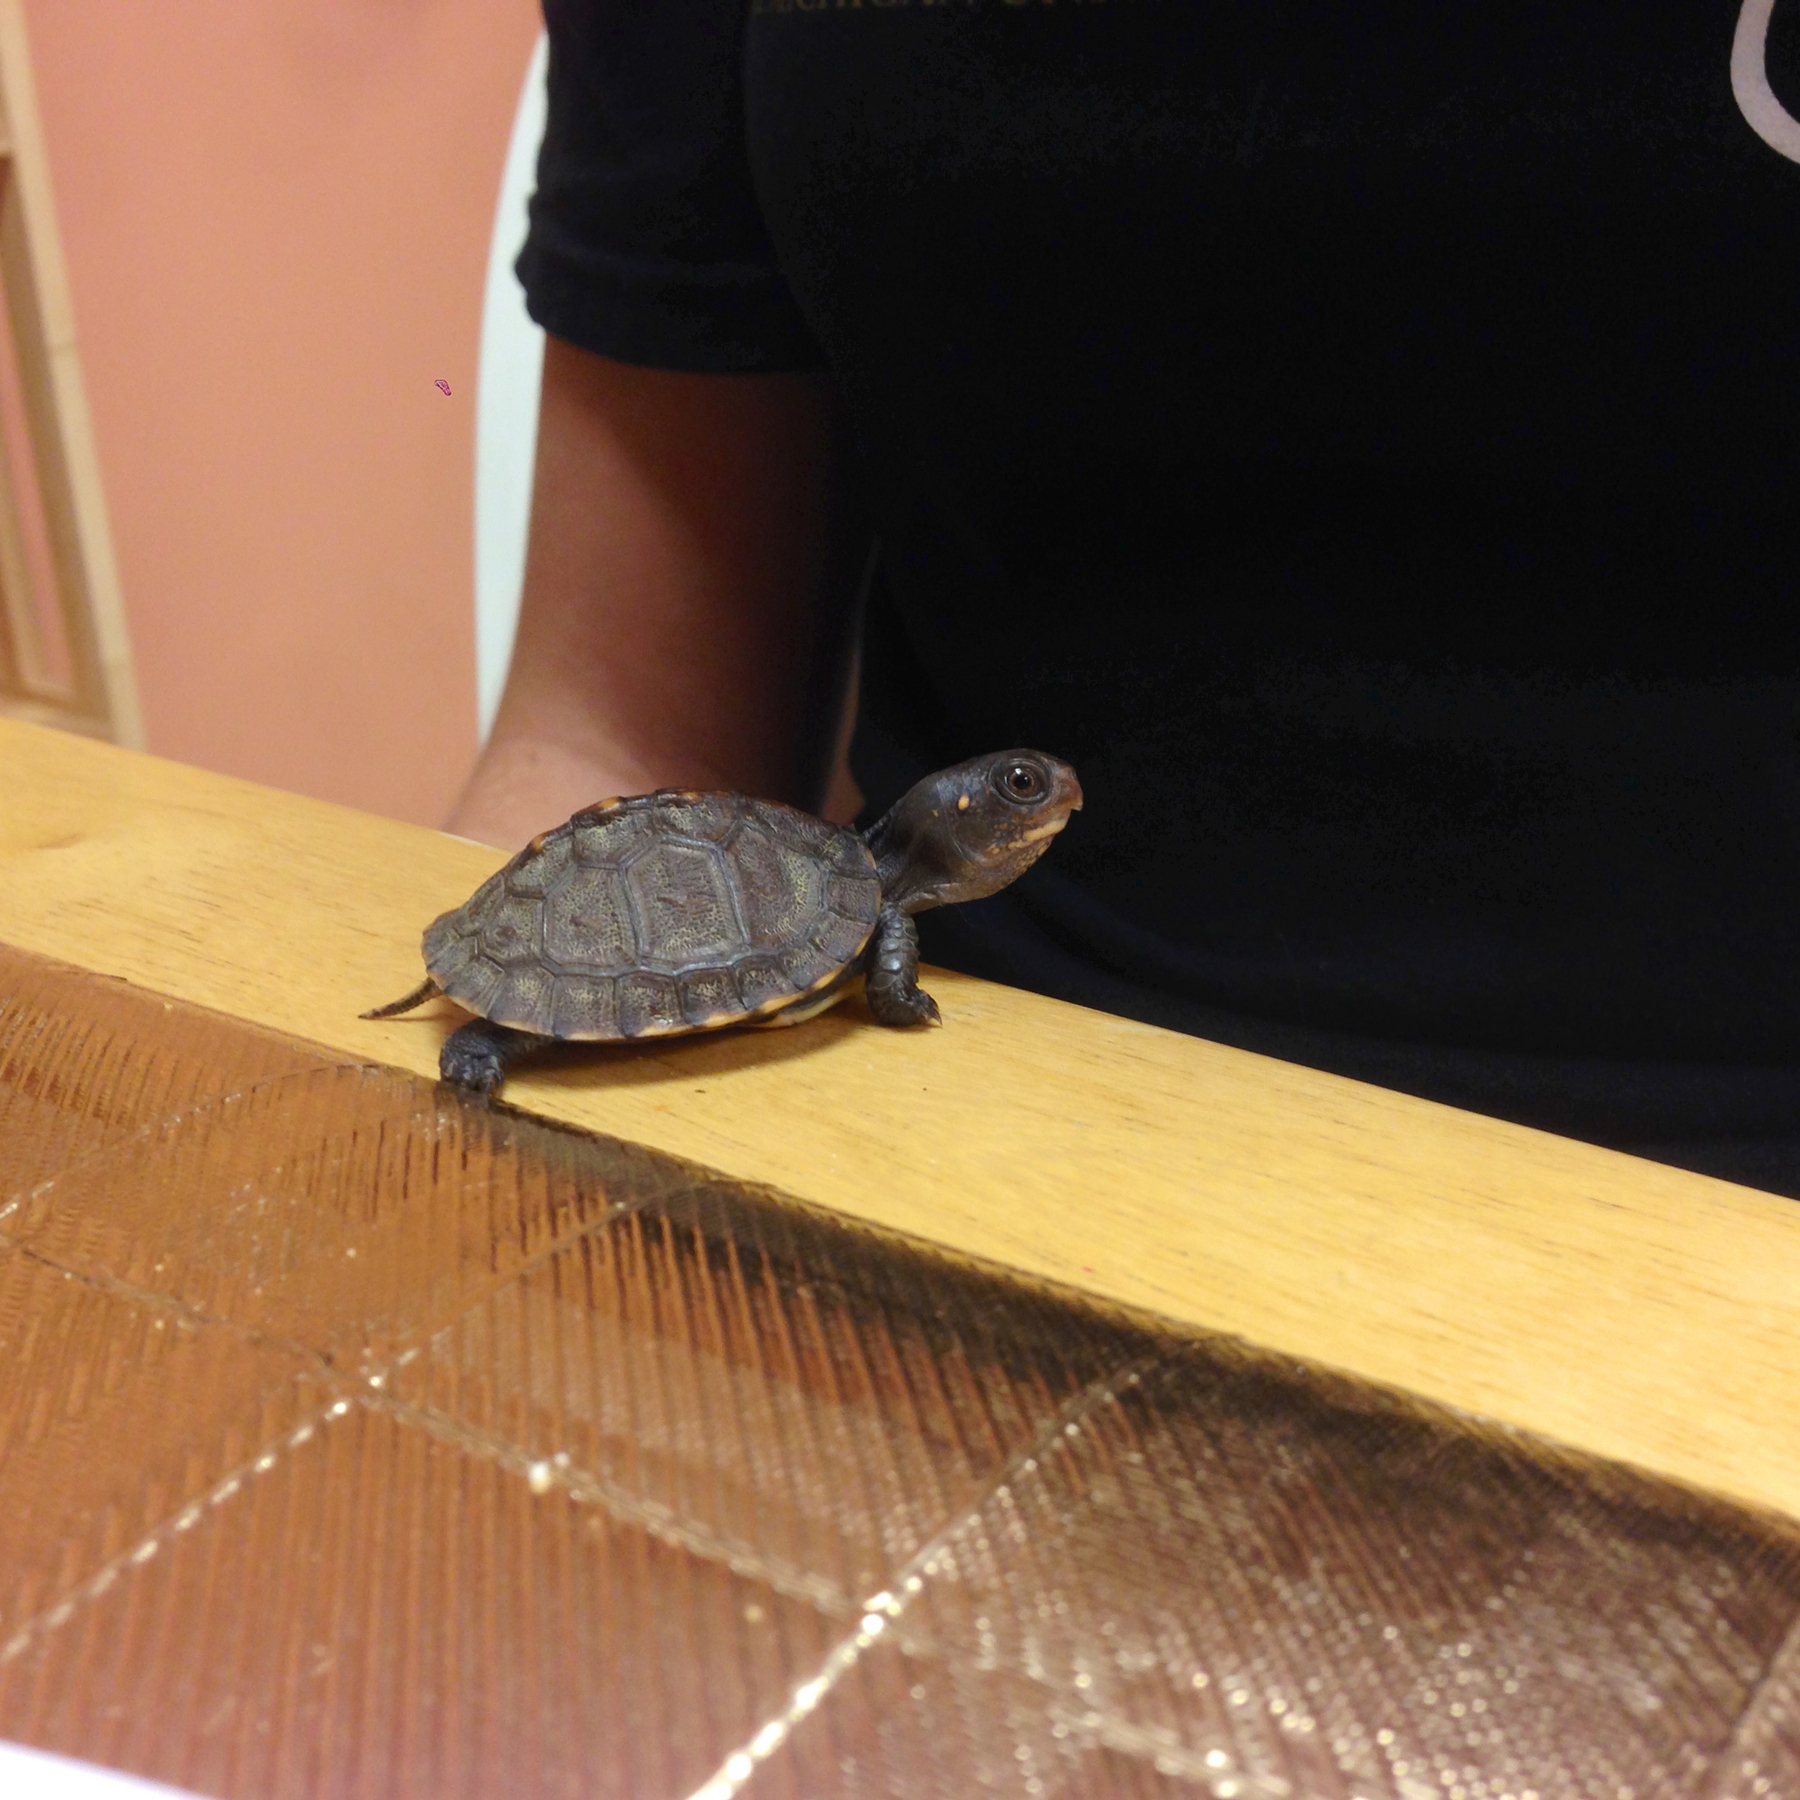 A small turtle on a table.